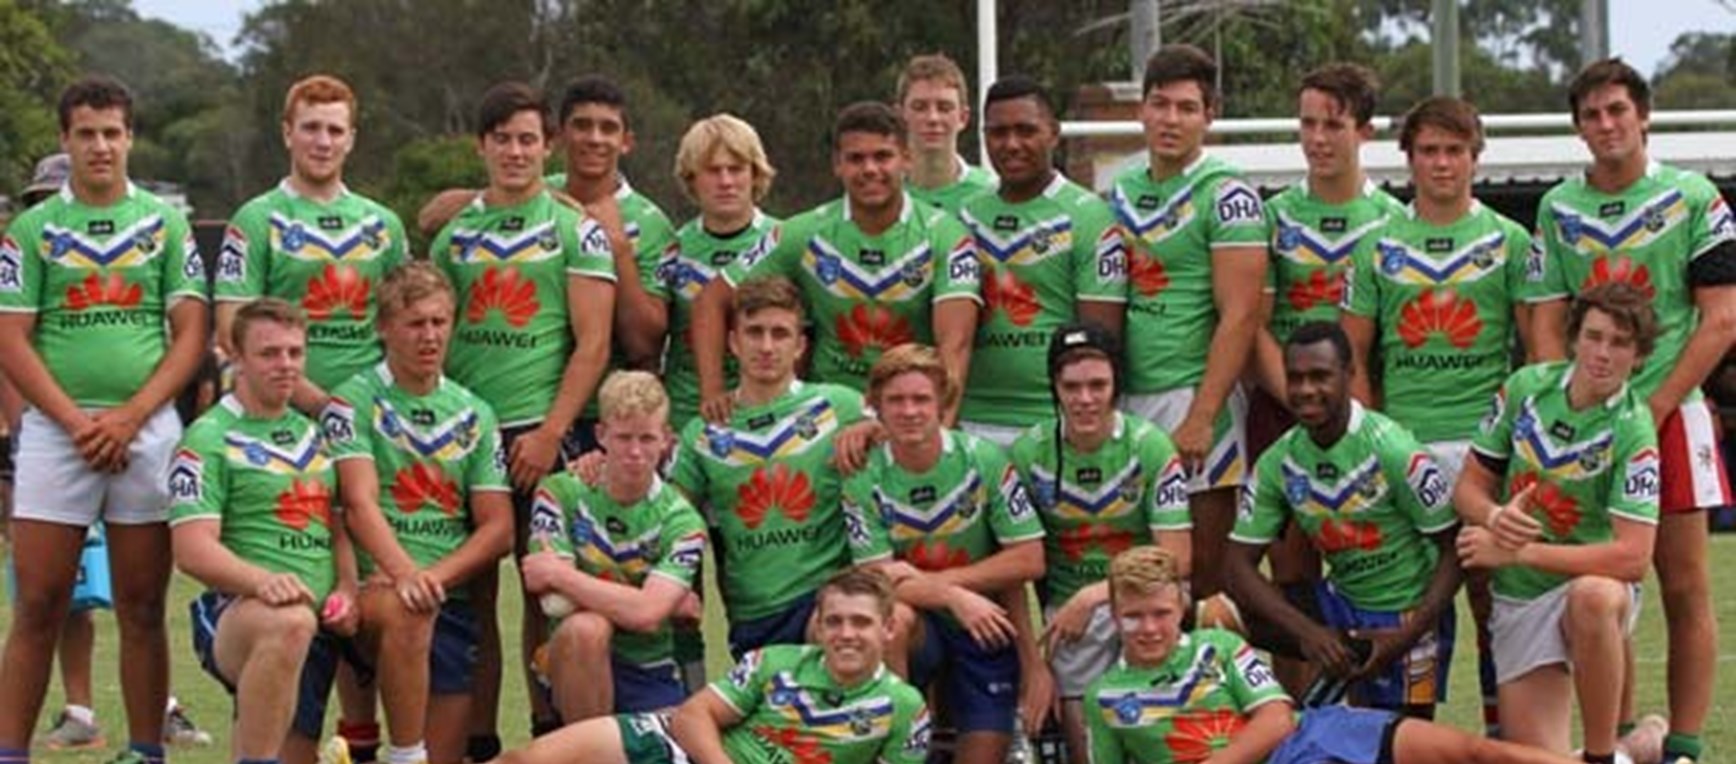 PHOTO GALLERY: Junior Reps Trial - Sharks